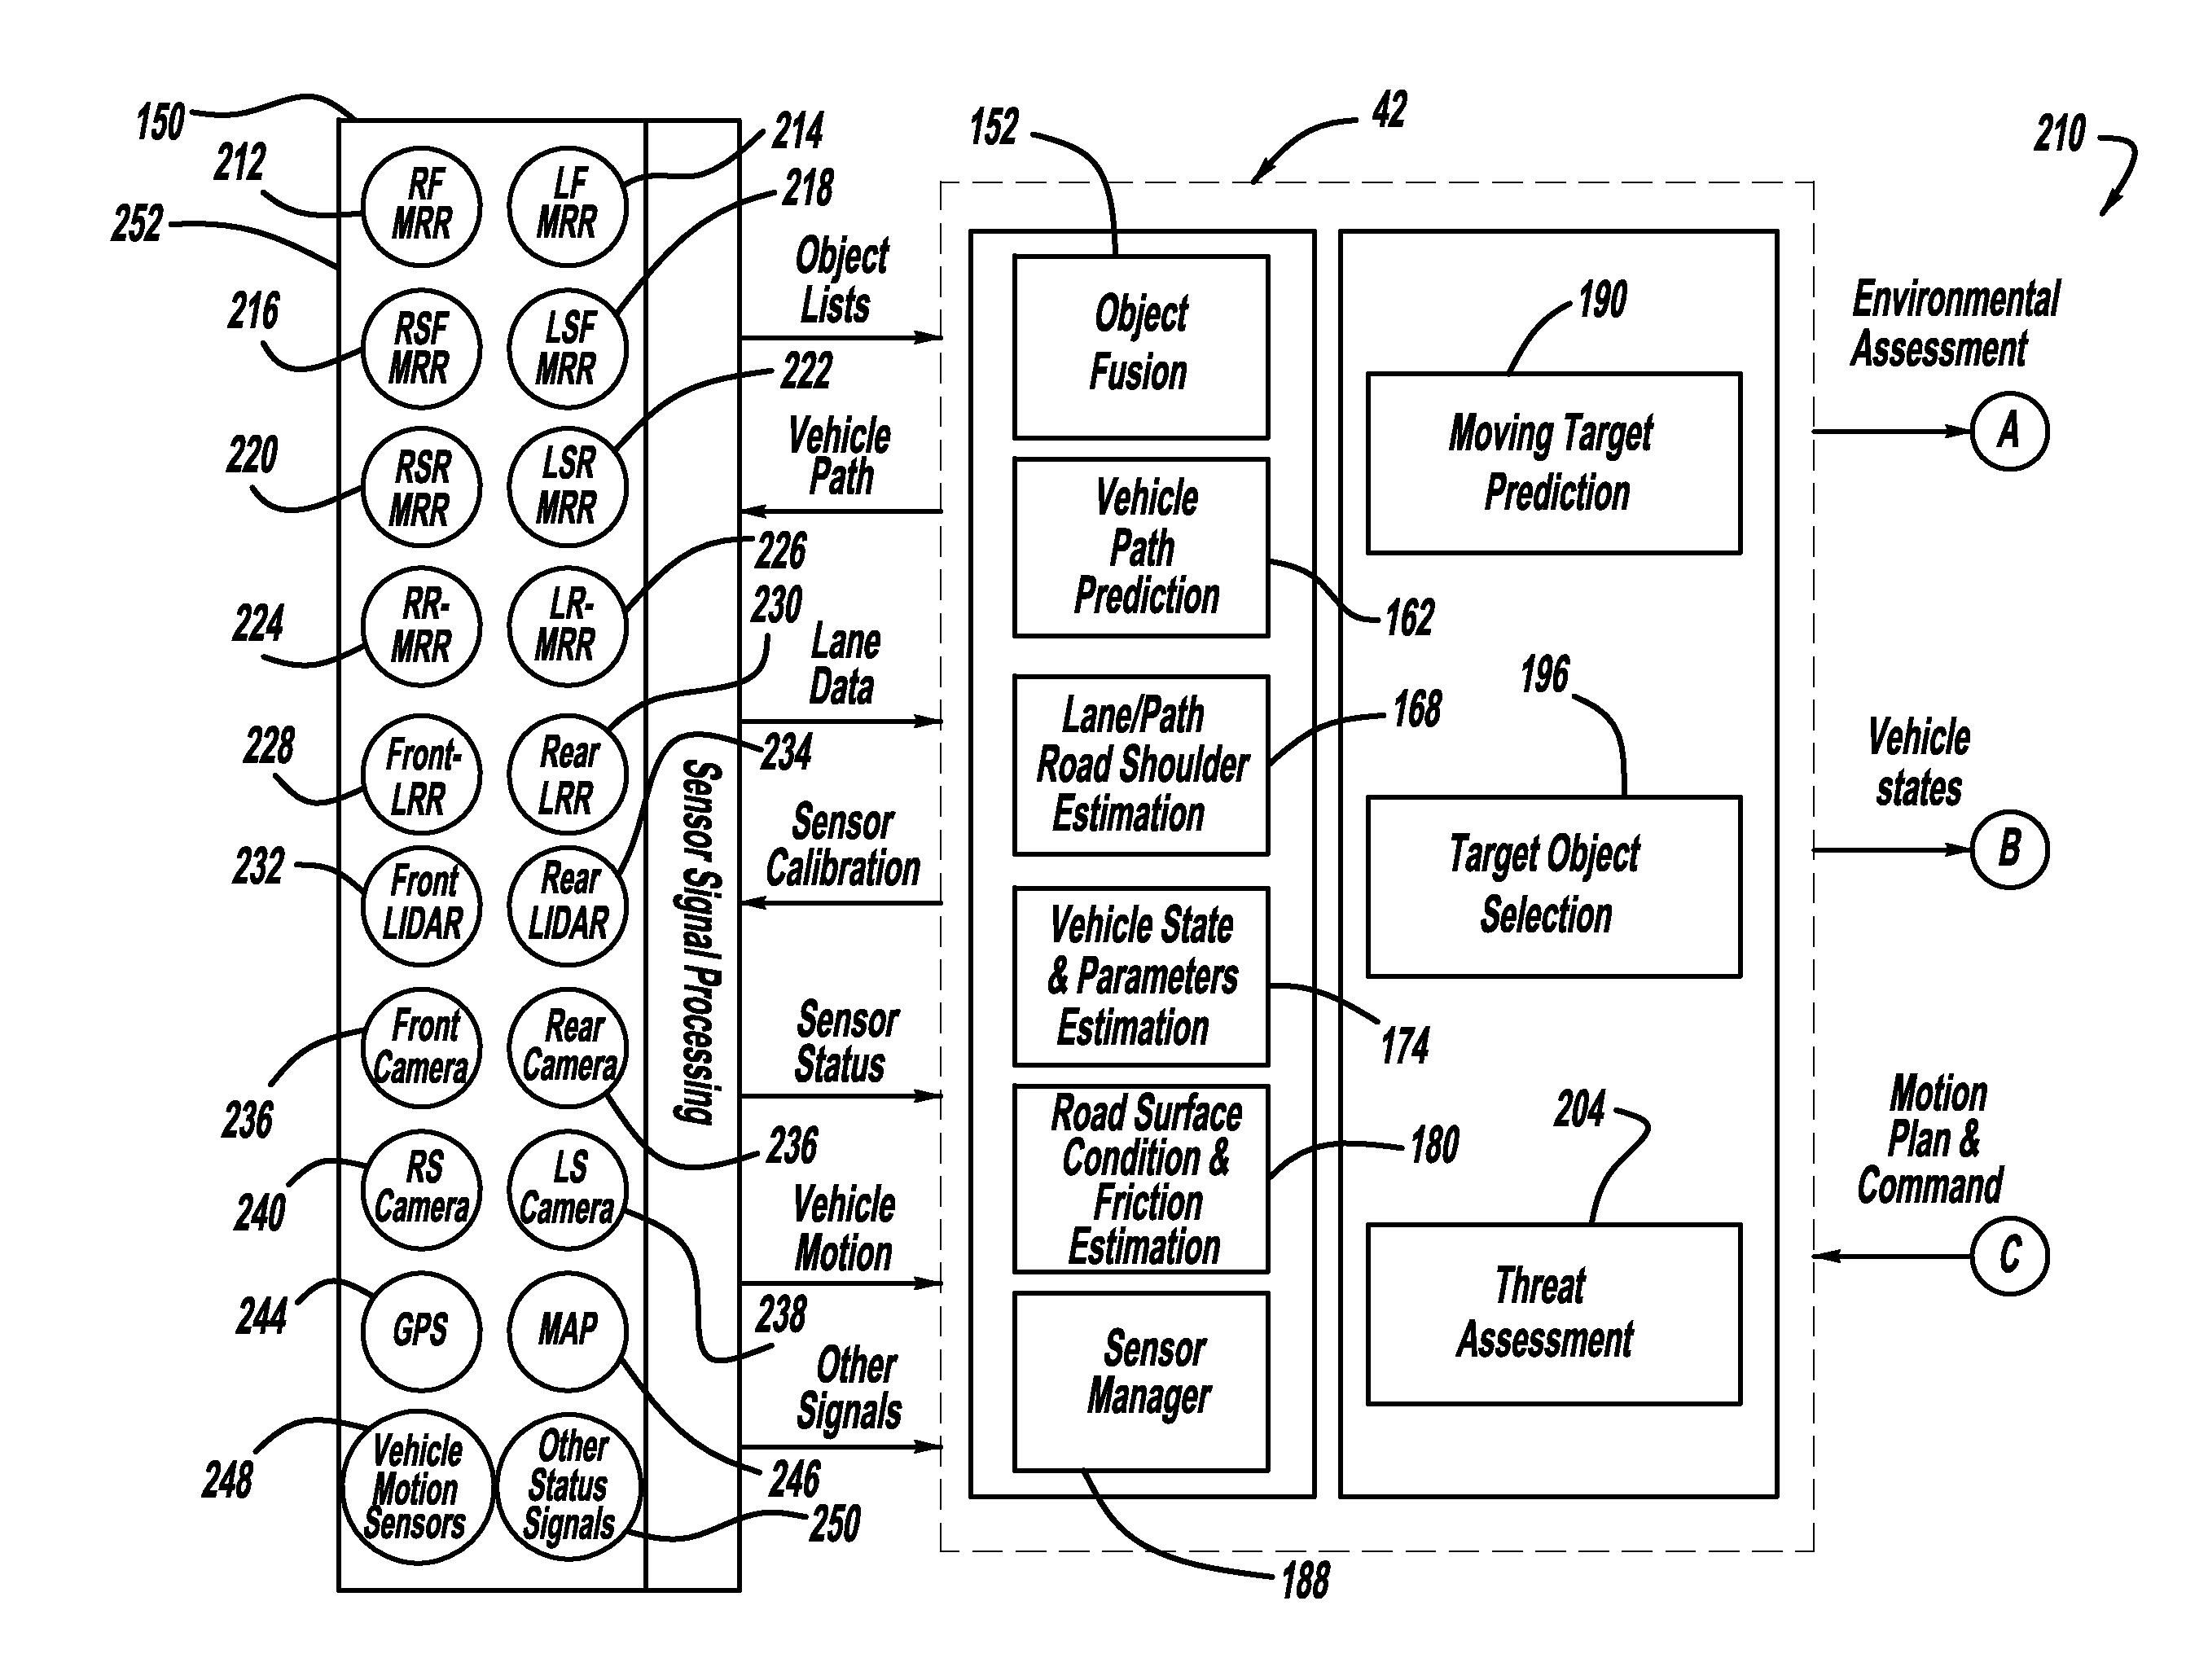 Function decomposition and control architecture for complex vehicle control system